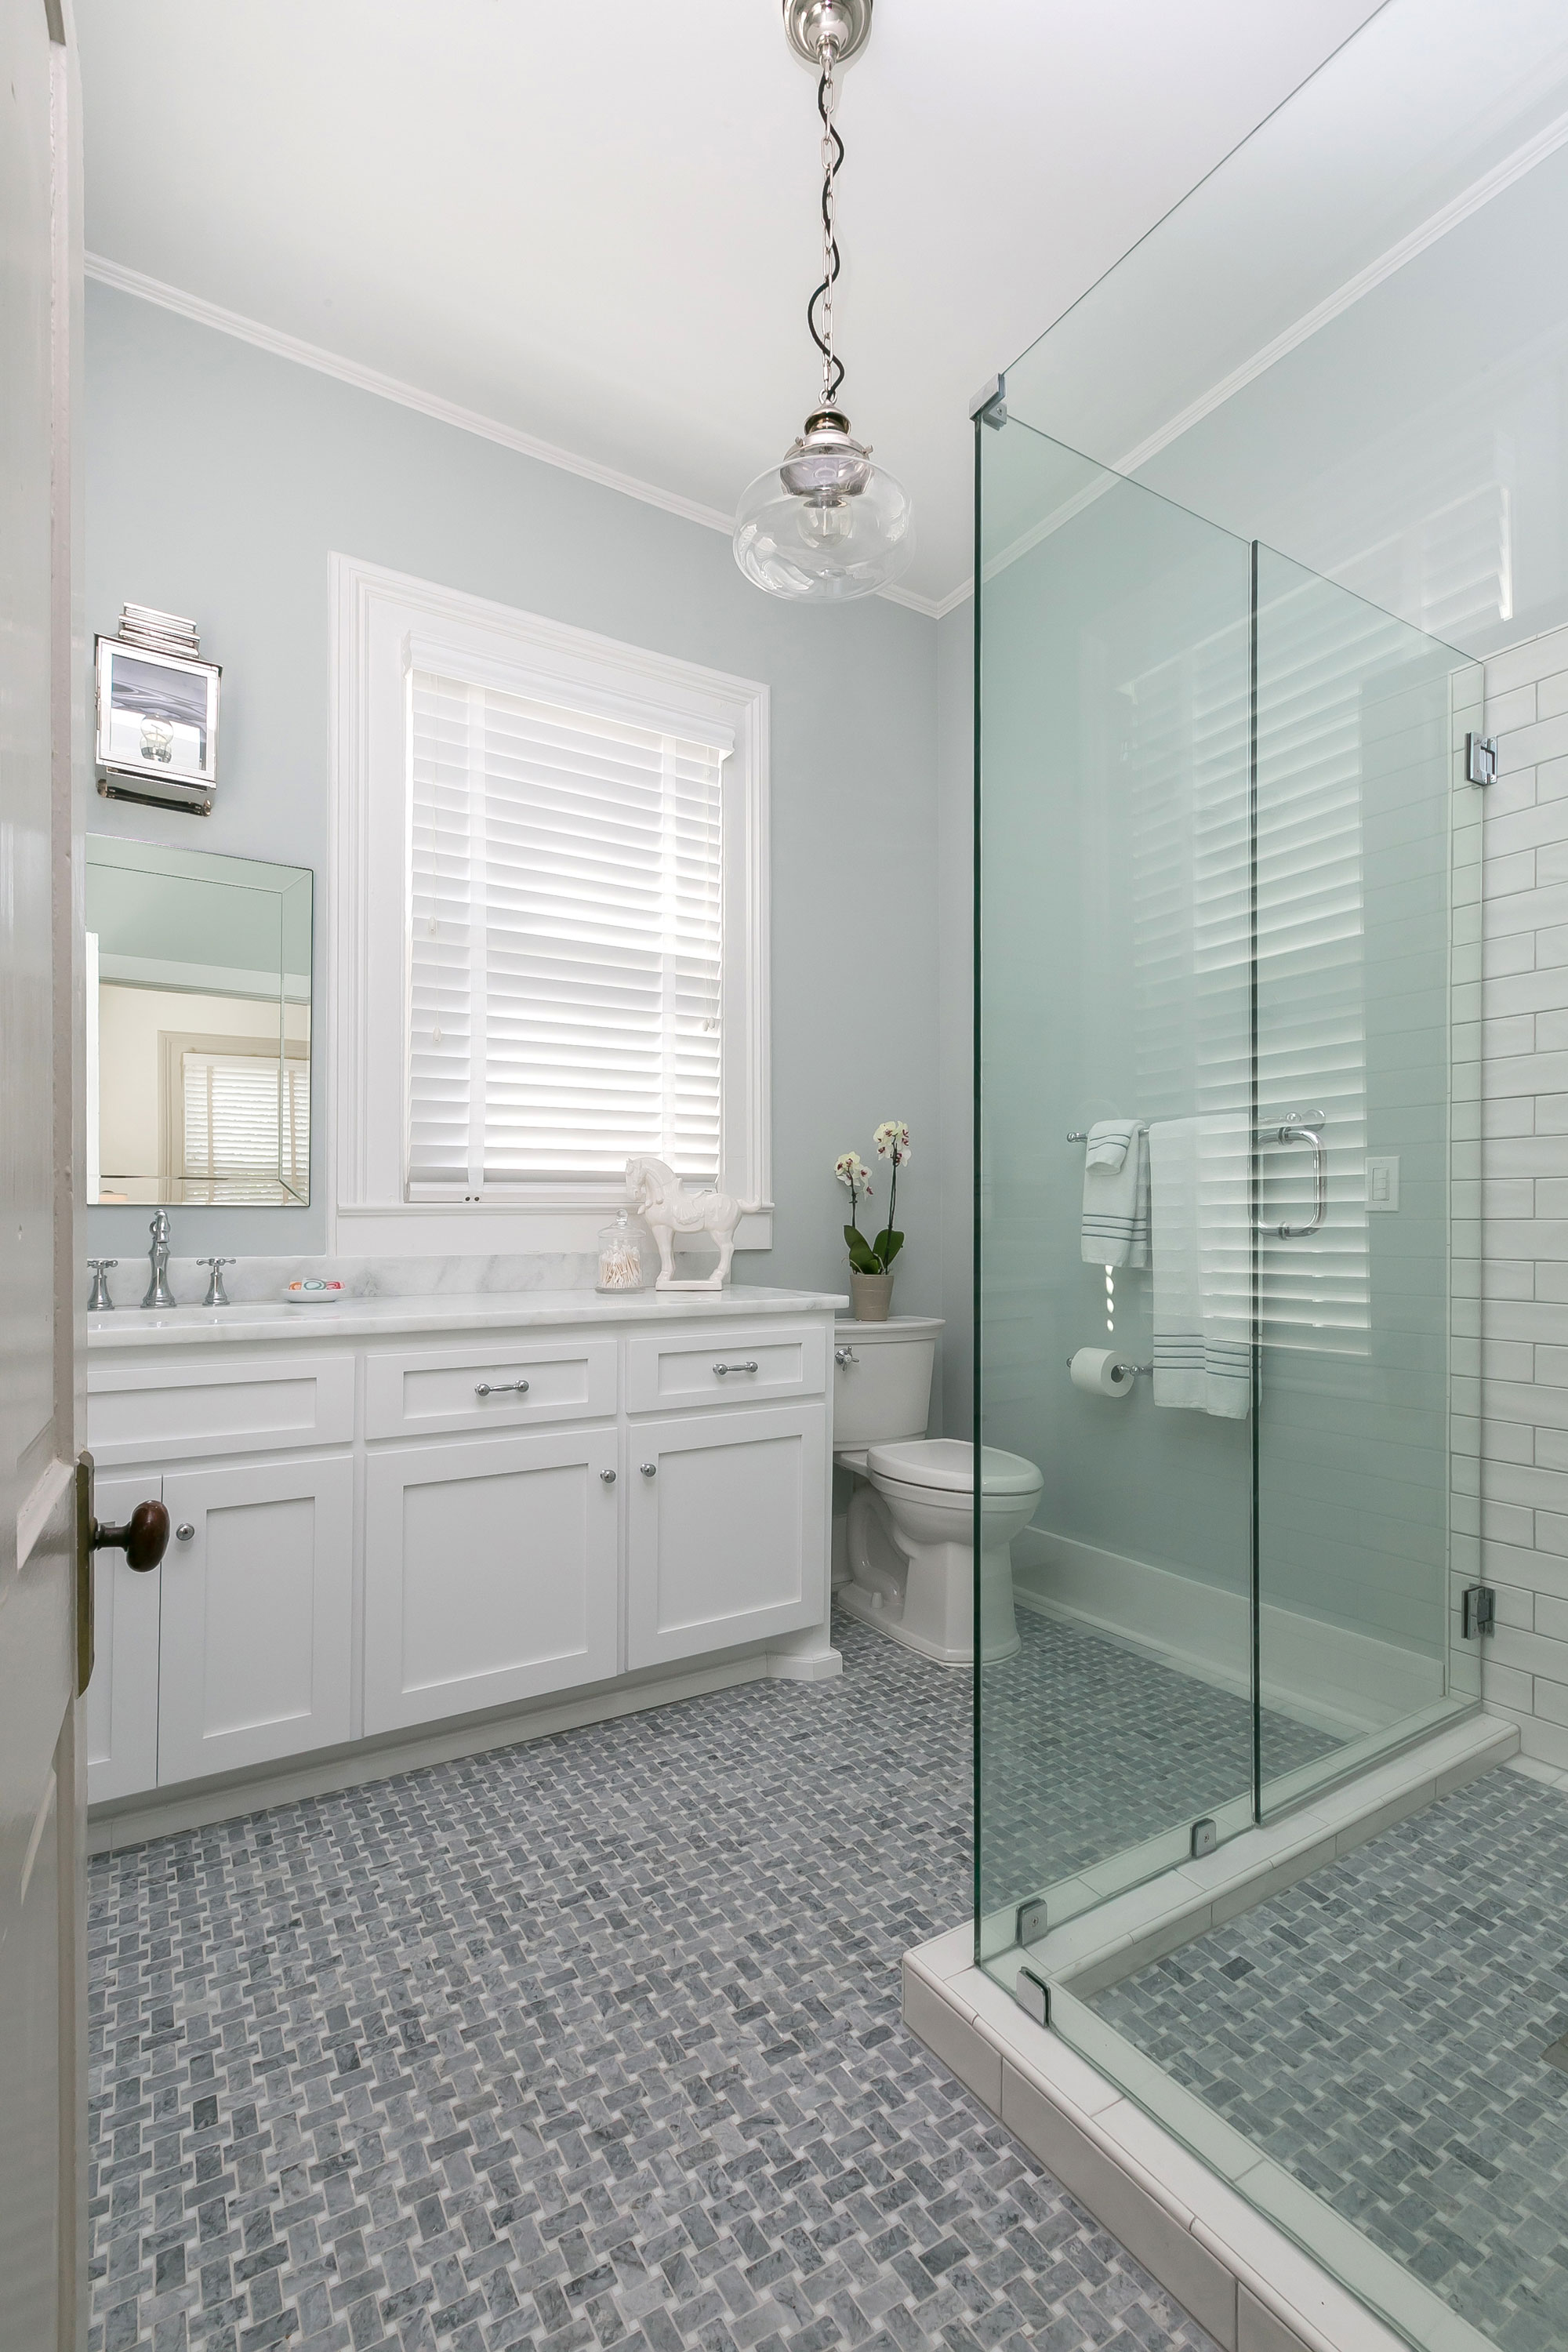 Marble basketweave tile, glass enclosed shower, vanity with offset mirror by window